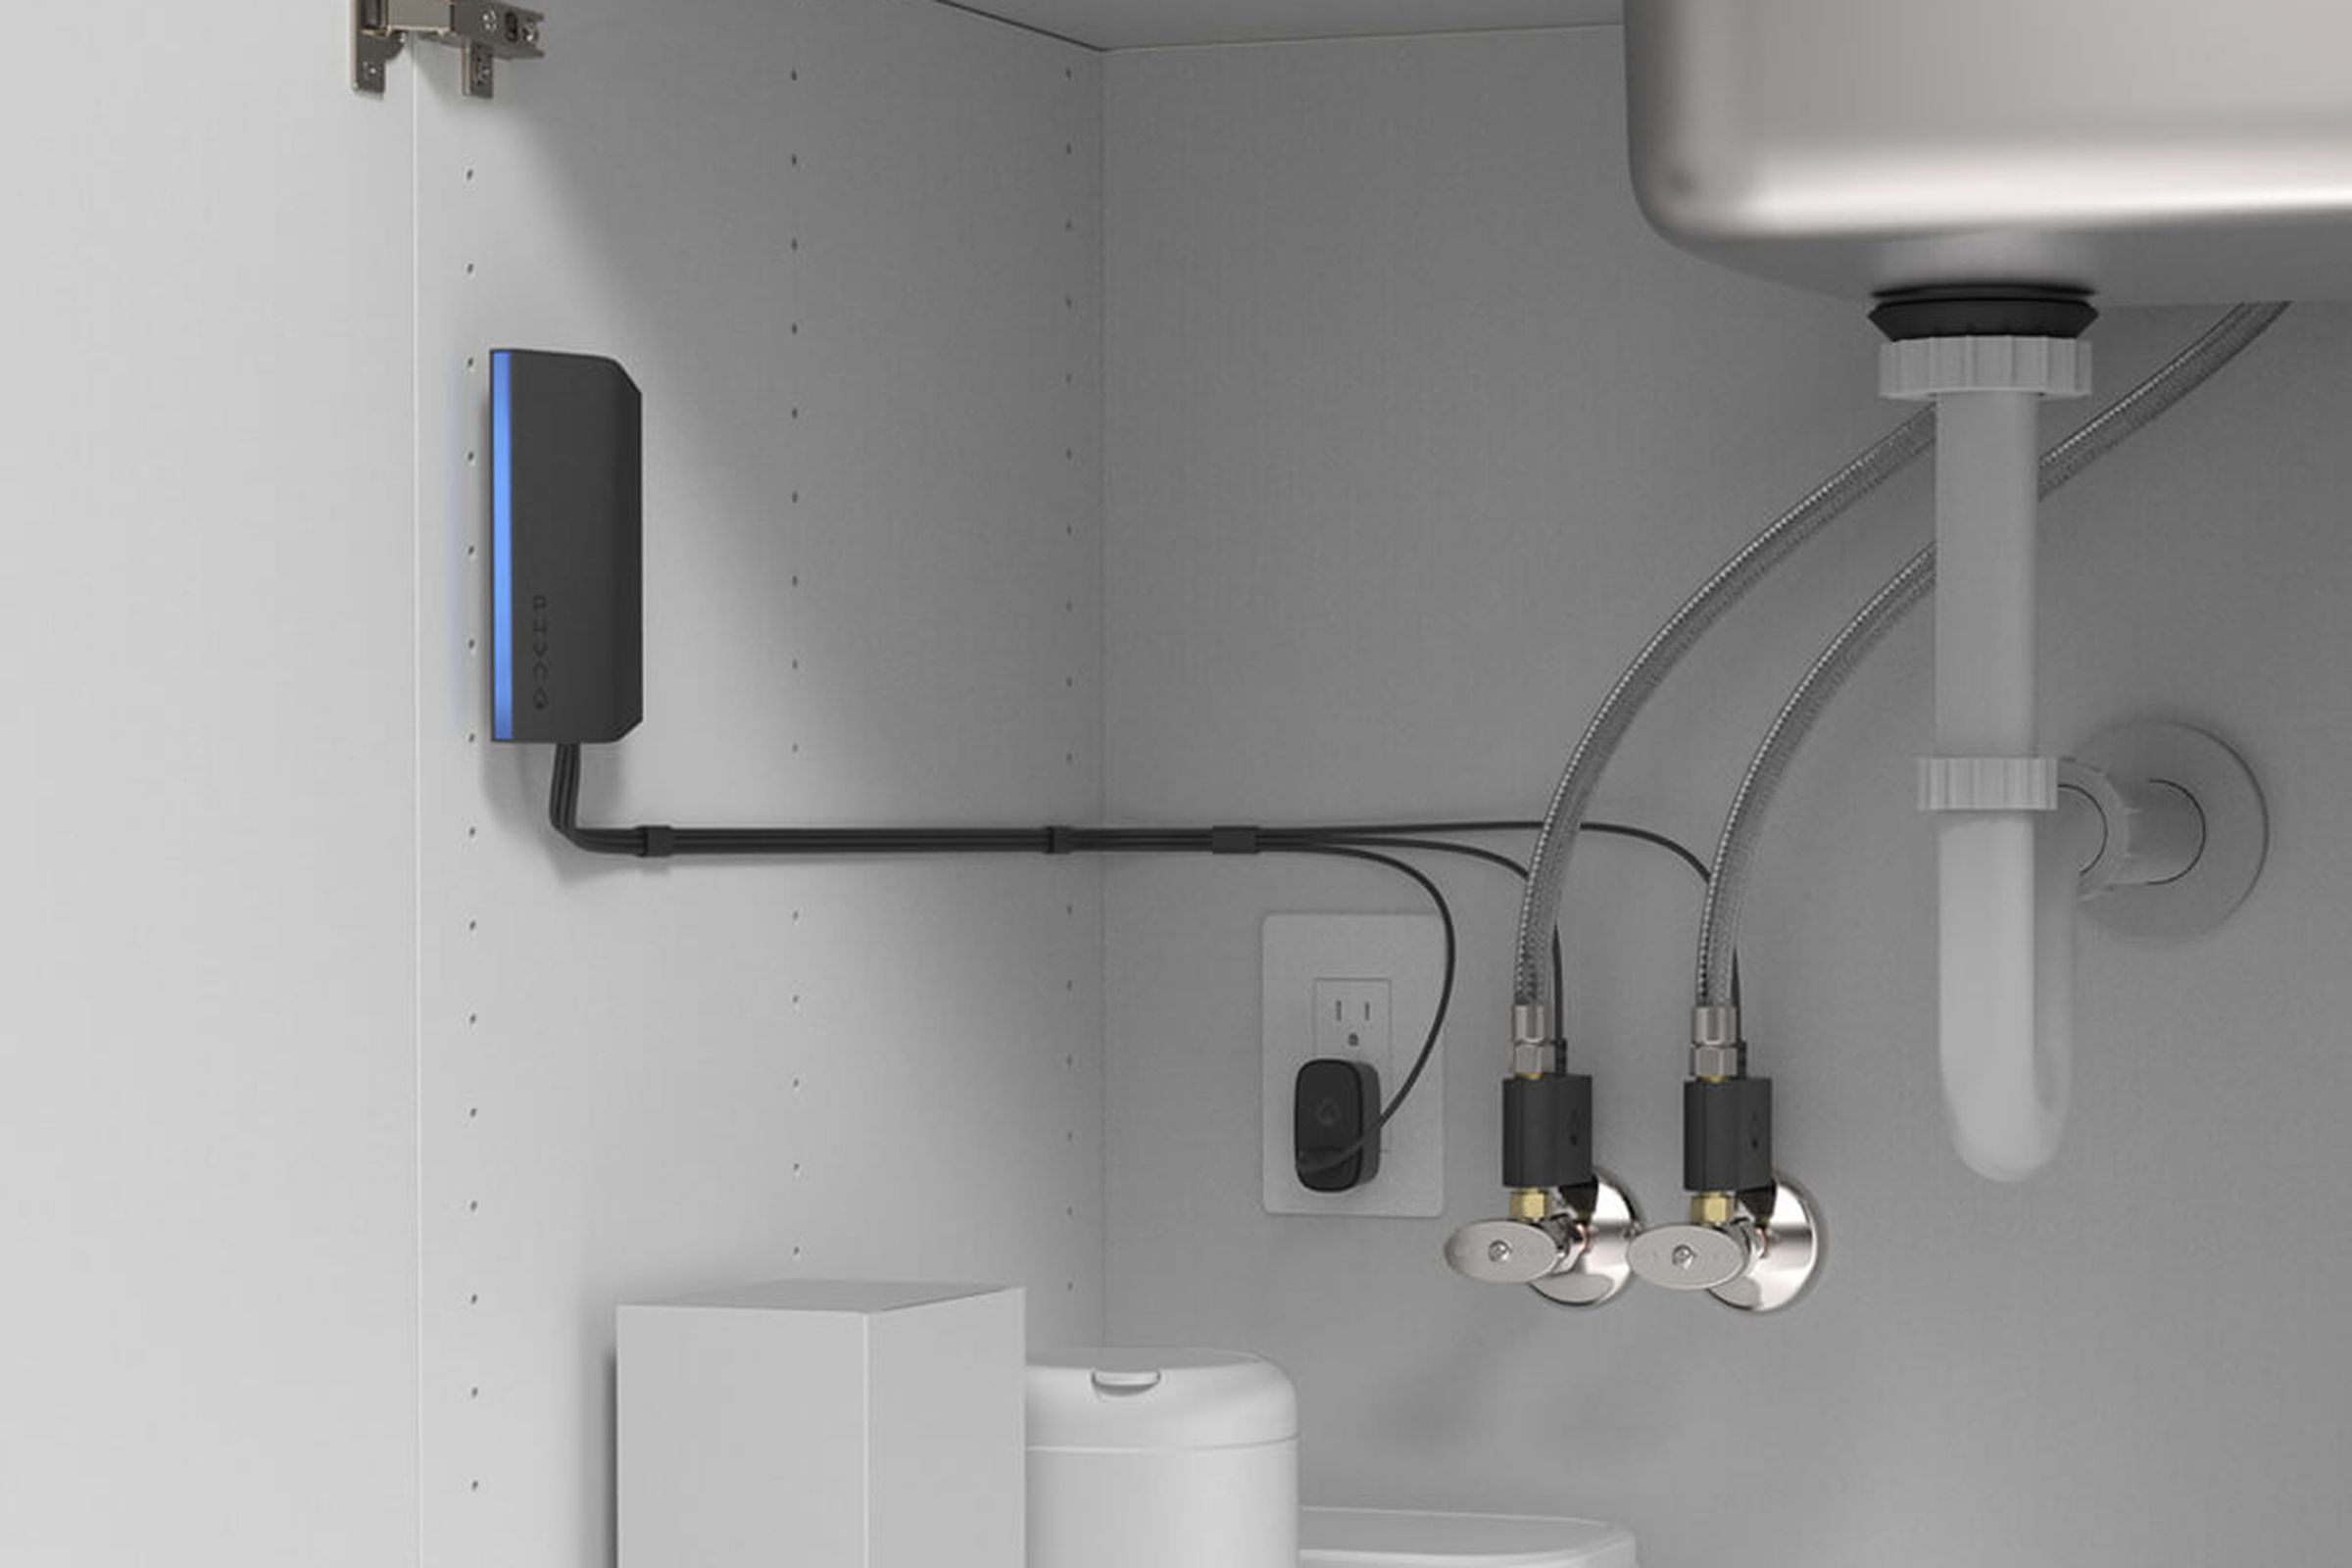 The Phyn Smart Water Assistant installed under a kitchen sink.